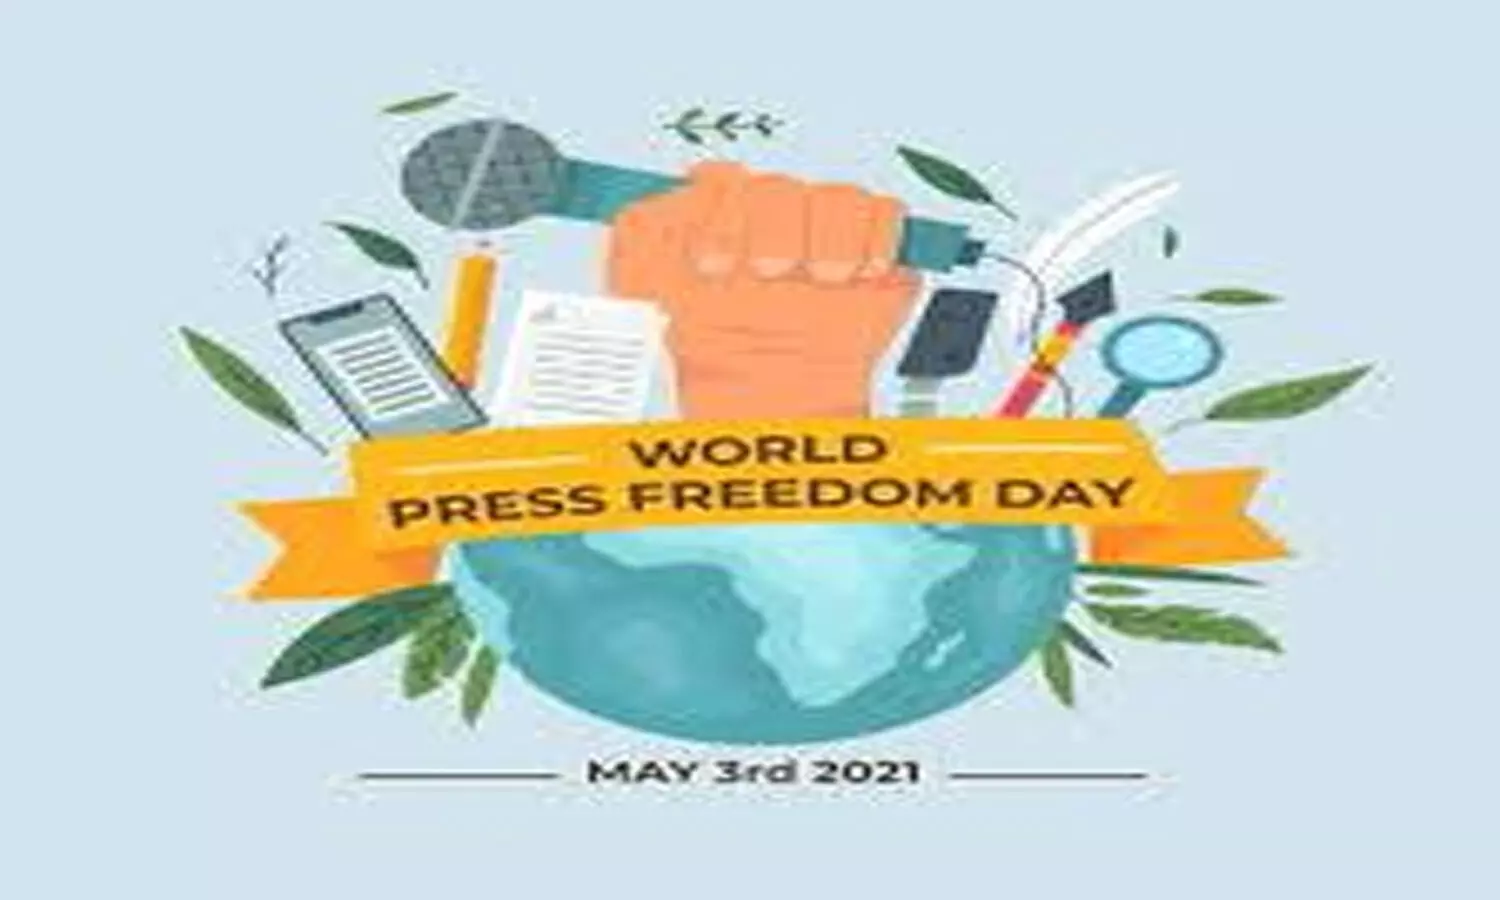 know about the World press freedom day